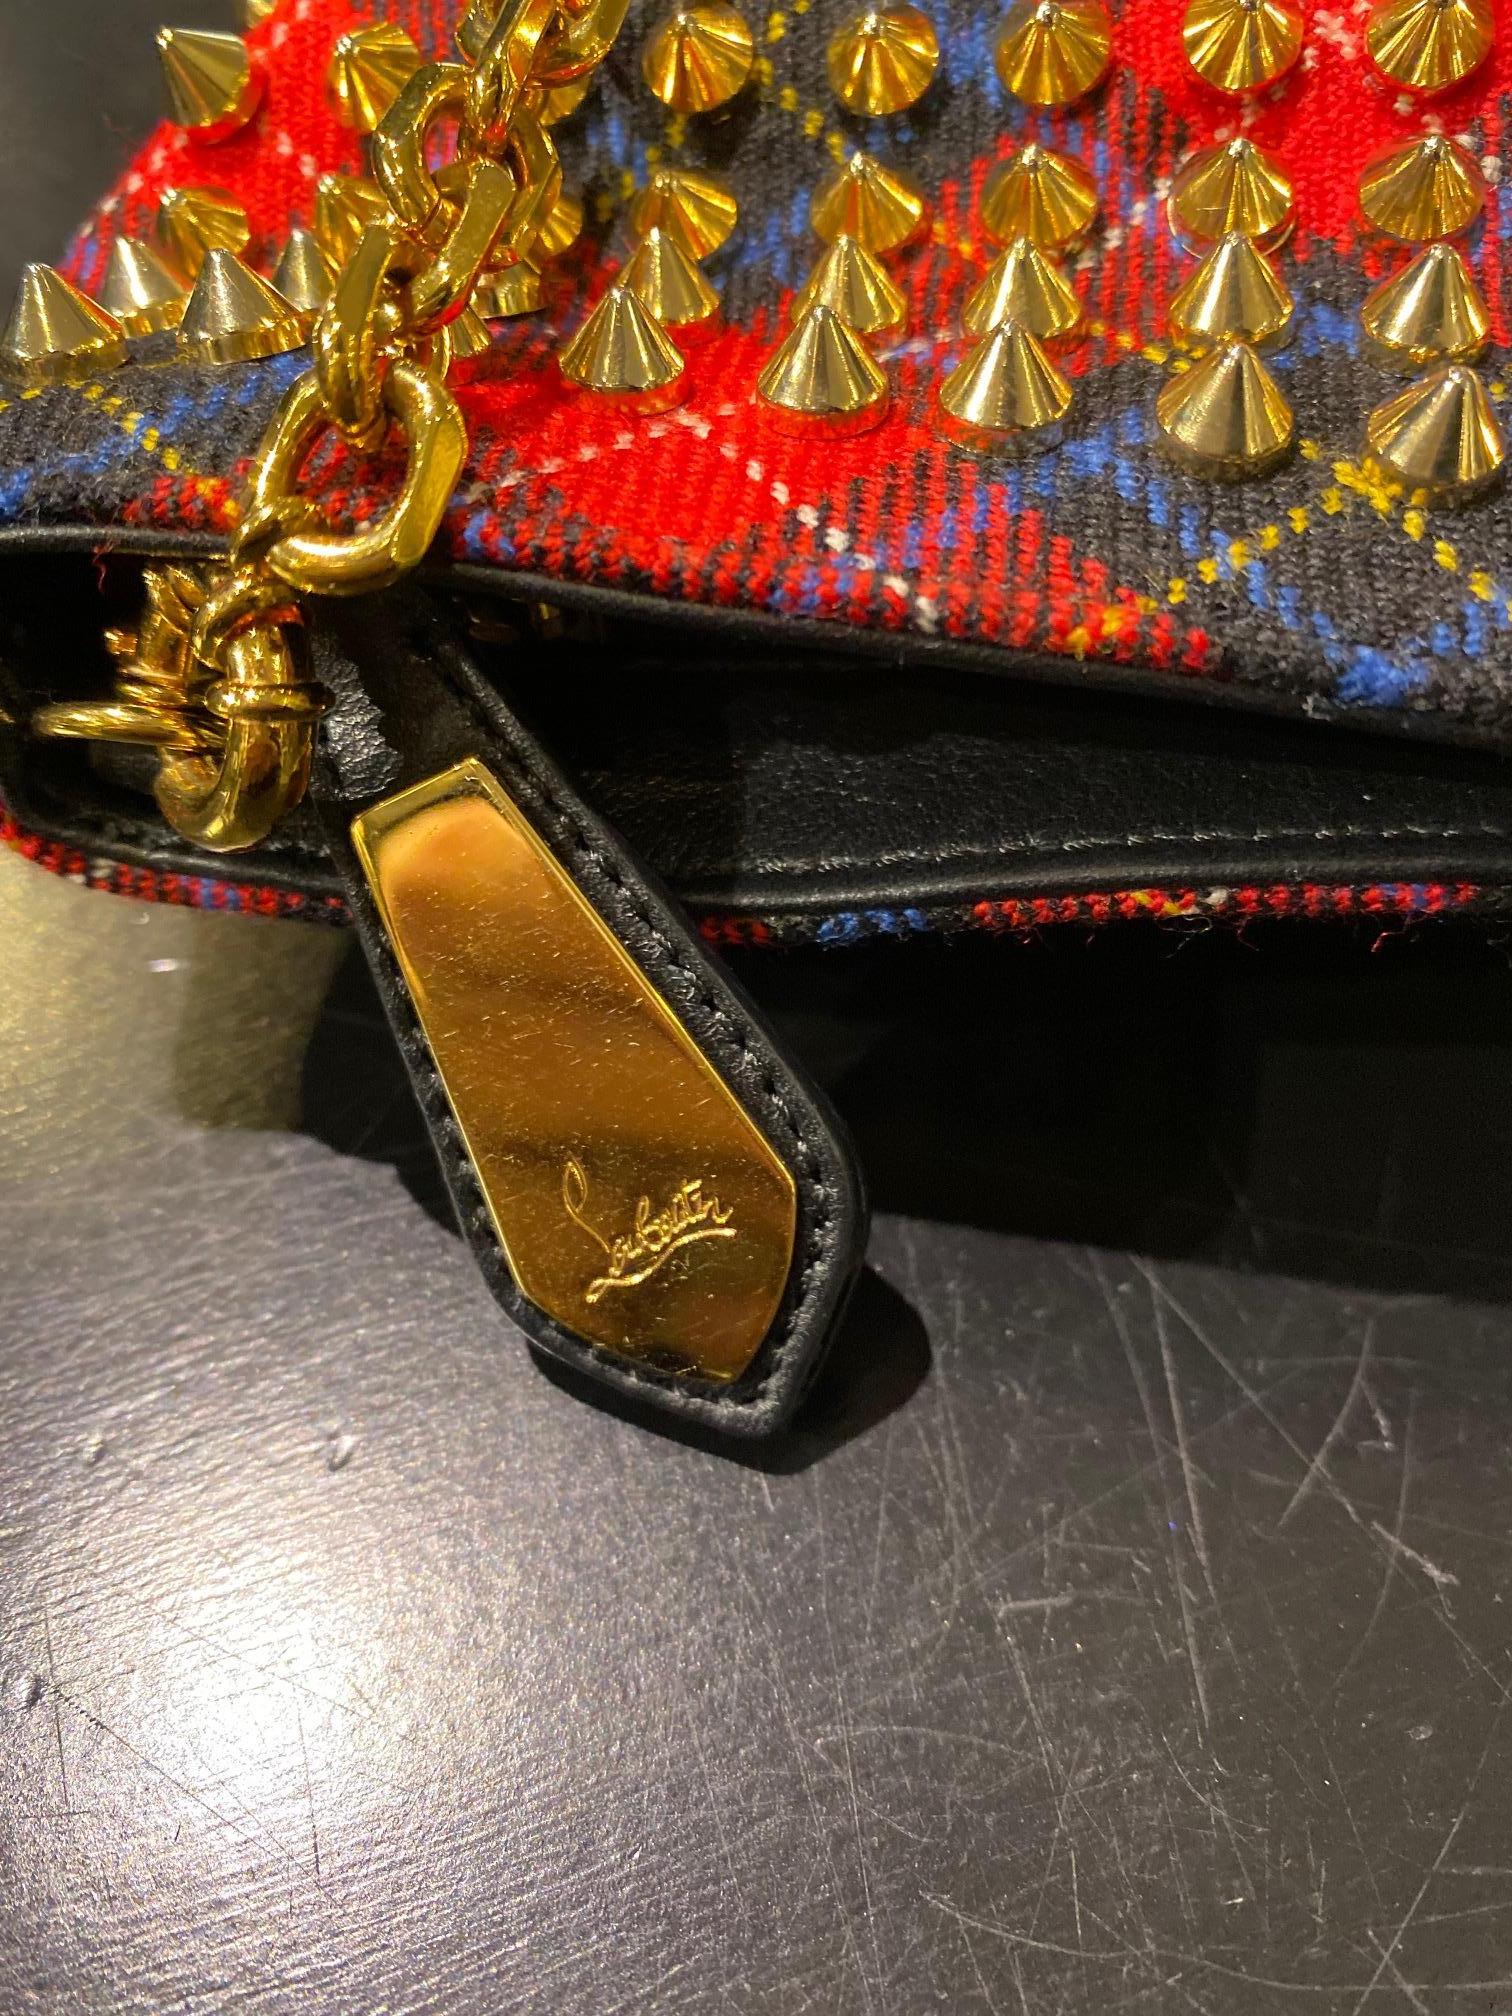 Christian Louboutin Plaid Spiked Clutch For Sale 3